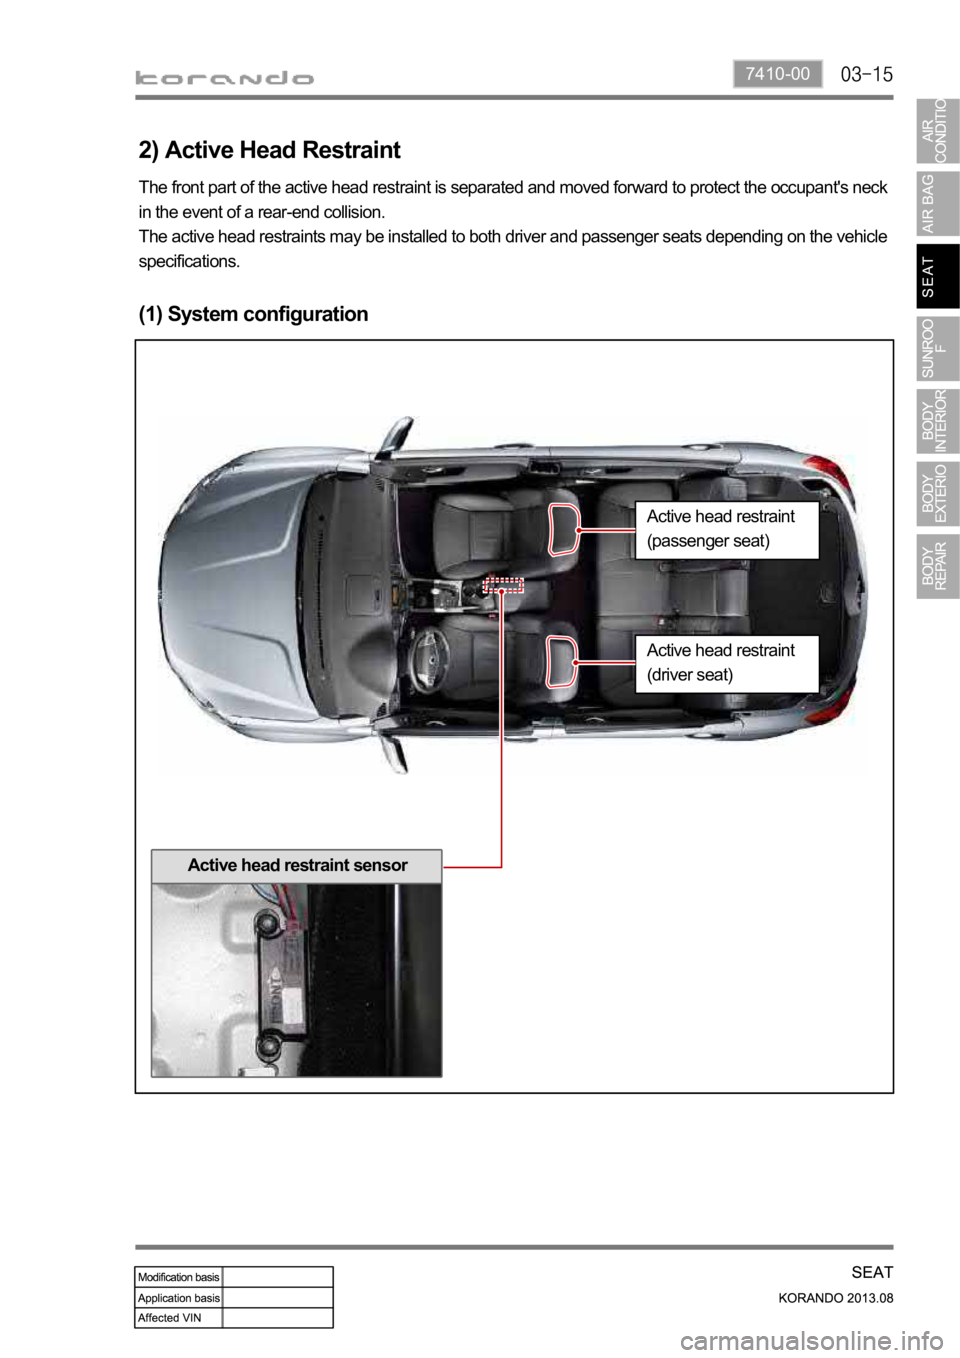 SSANGYONG KORANDO 2013 User Guide 7410-00
The front part of the active head restraint is separated and moved forward to protect the occupant's neck 
in the event of a rear-end collision.
The active head restraints may be installed